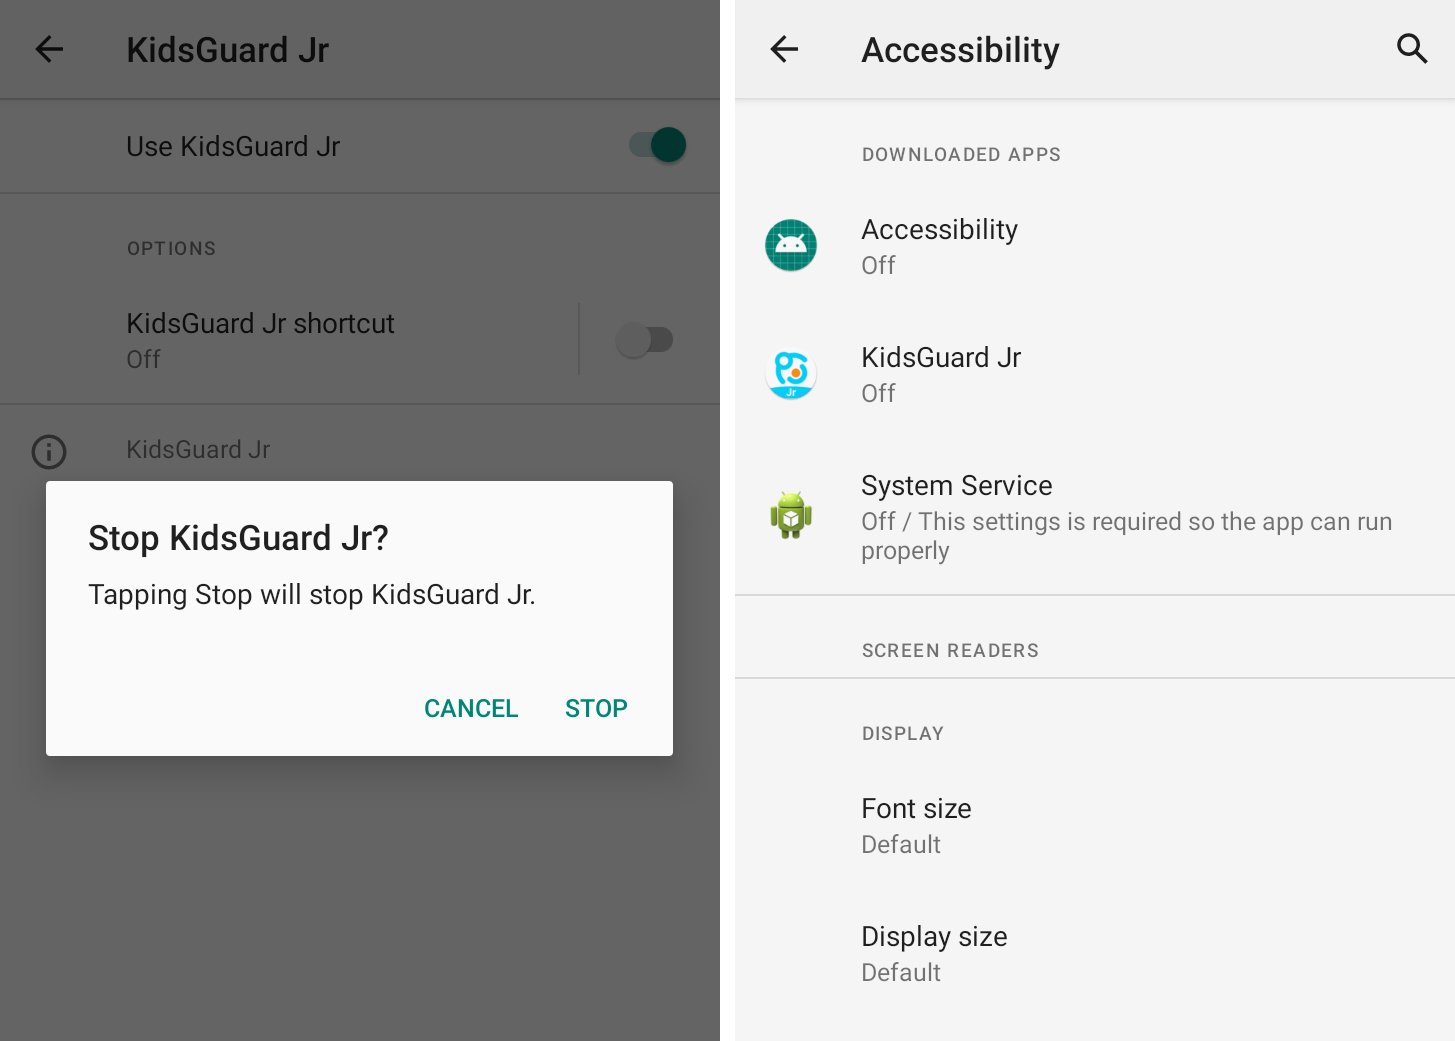 Two screenshots side-by-side showing an app called KidsGuard hijacking the accessibility feature in Android to snoop on unsuspecting users. The second screenshot shows three stalkerware apps — called Accessibility, KidsGuard, and System Service — all switched to 'off' so that they are no longer actively functioning.